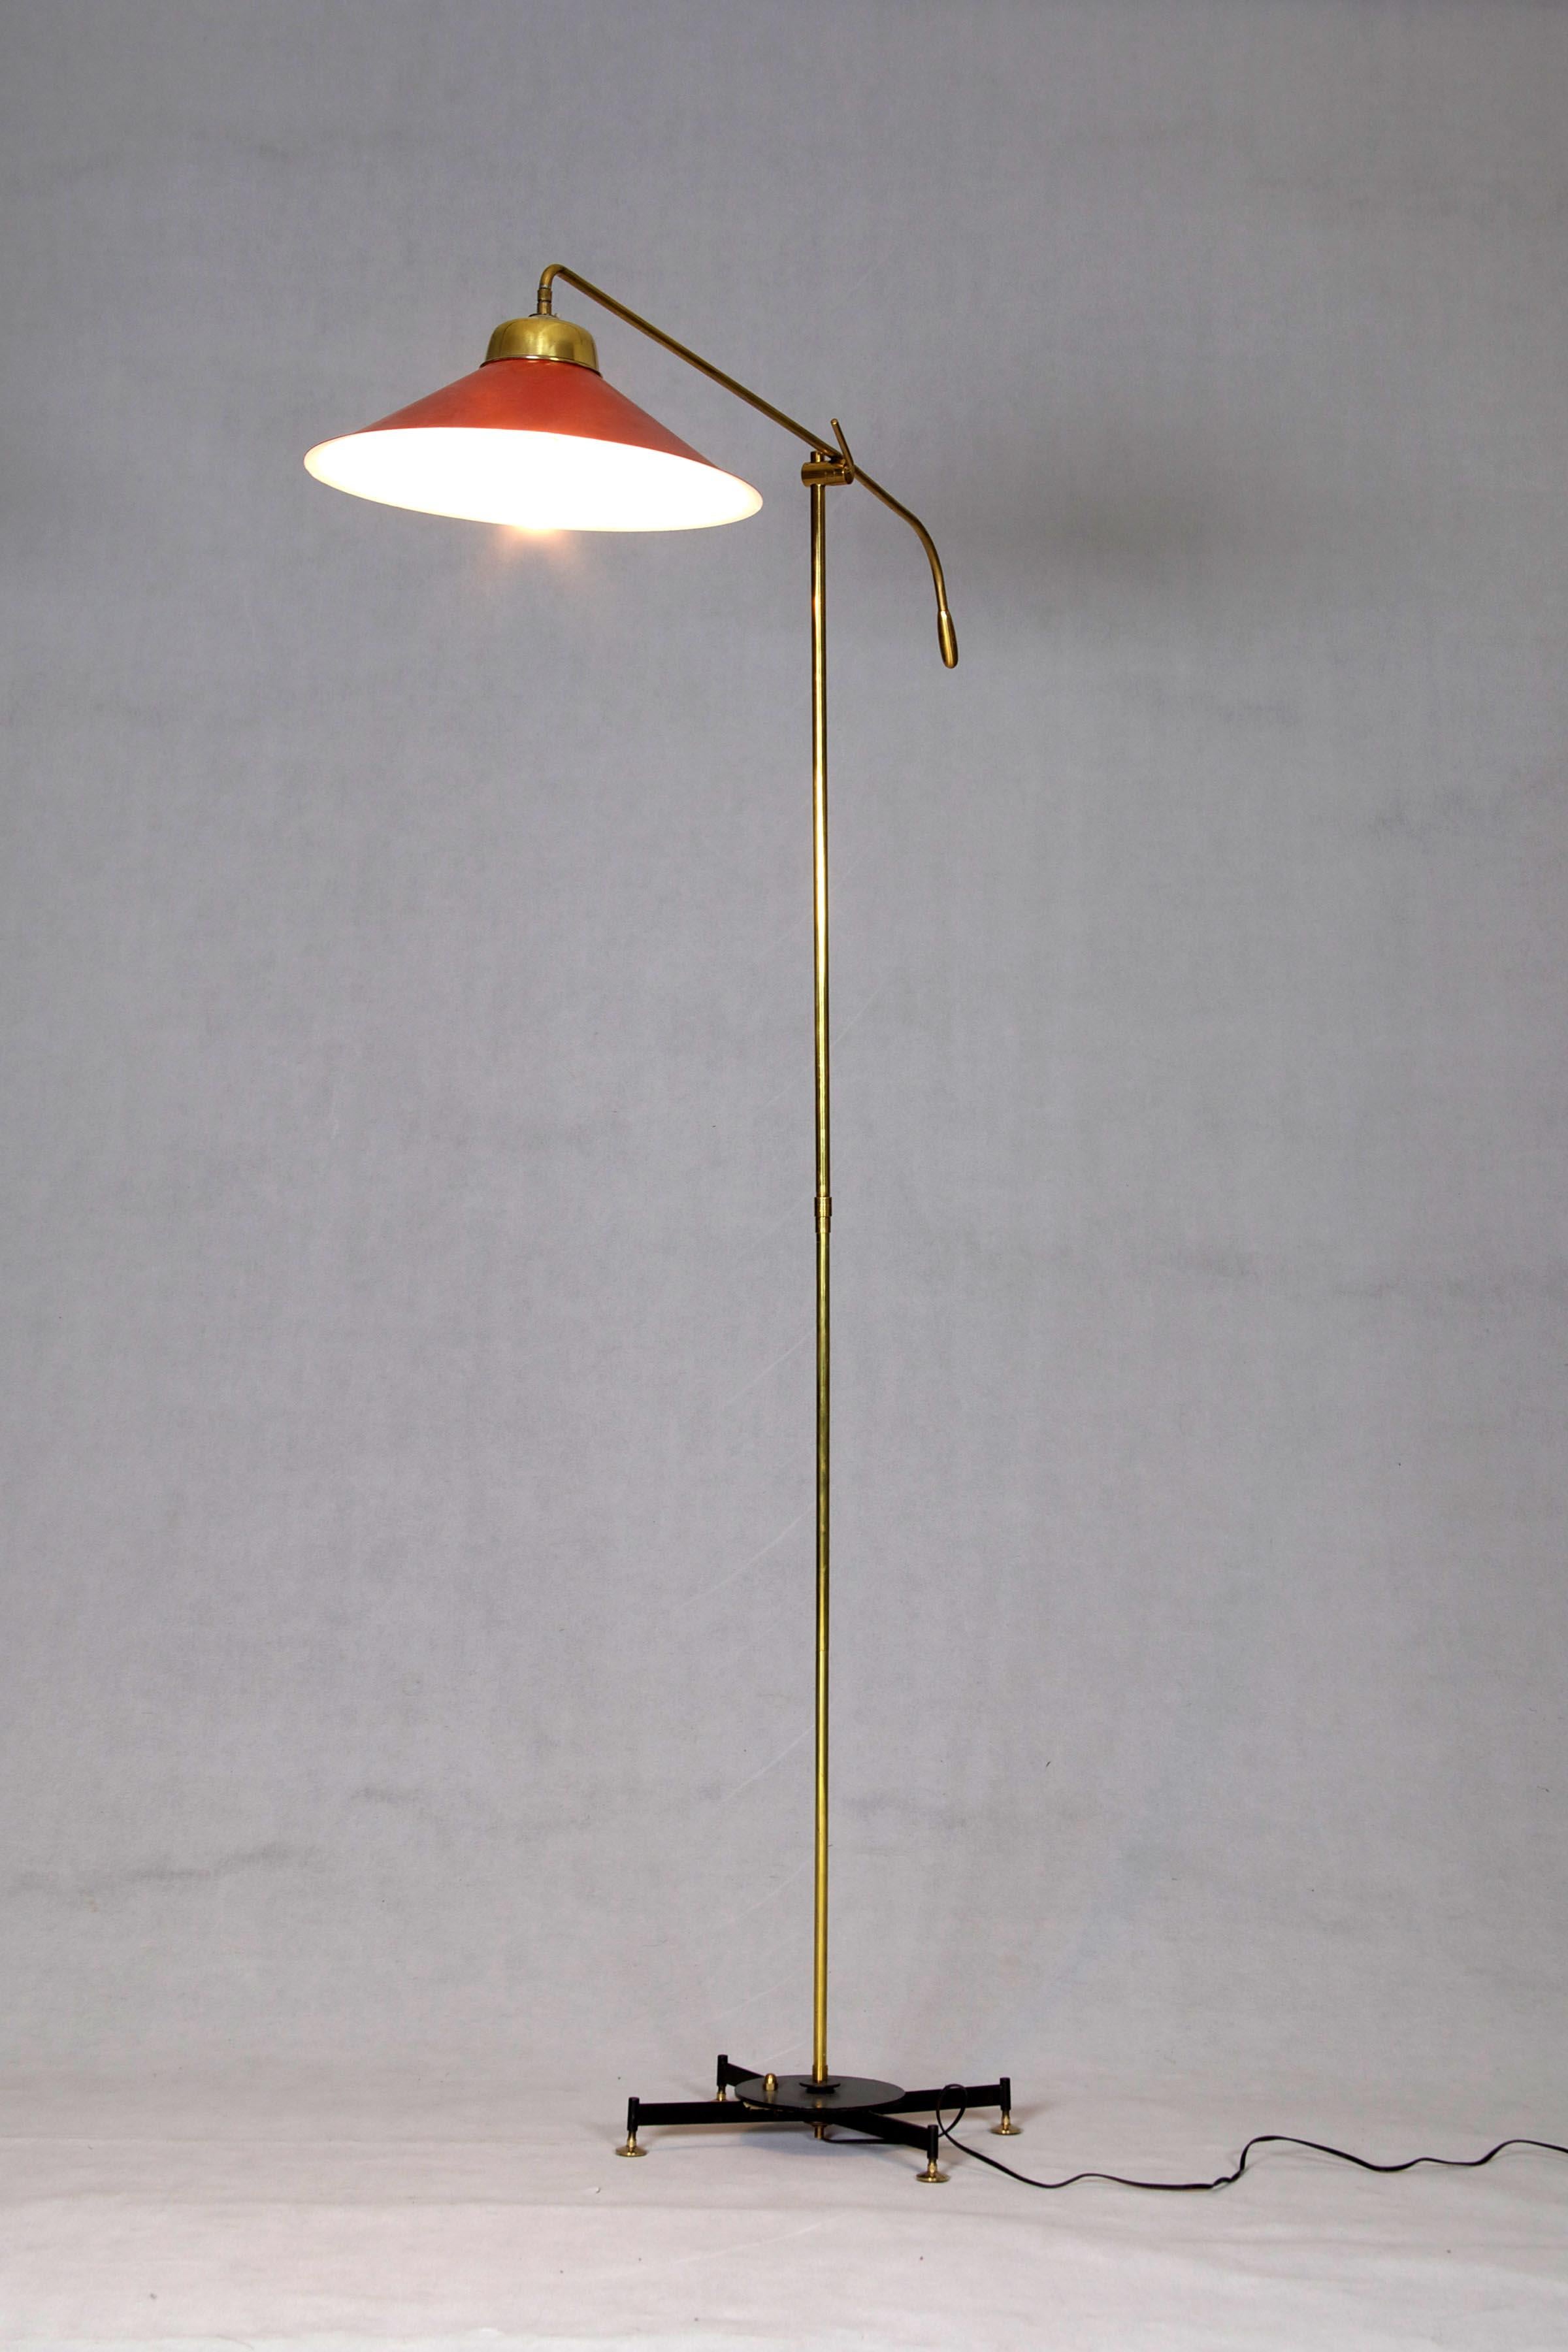 Floor lamp with adjustable brass arm and lacquered shade. Italy, 1950s.